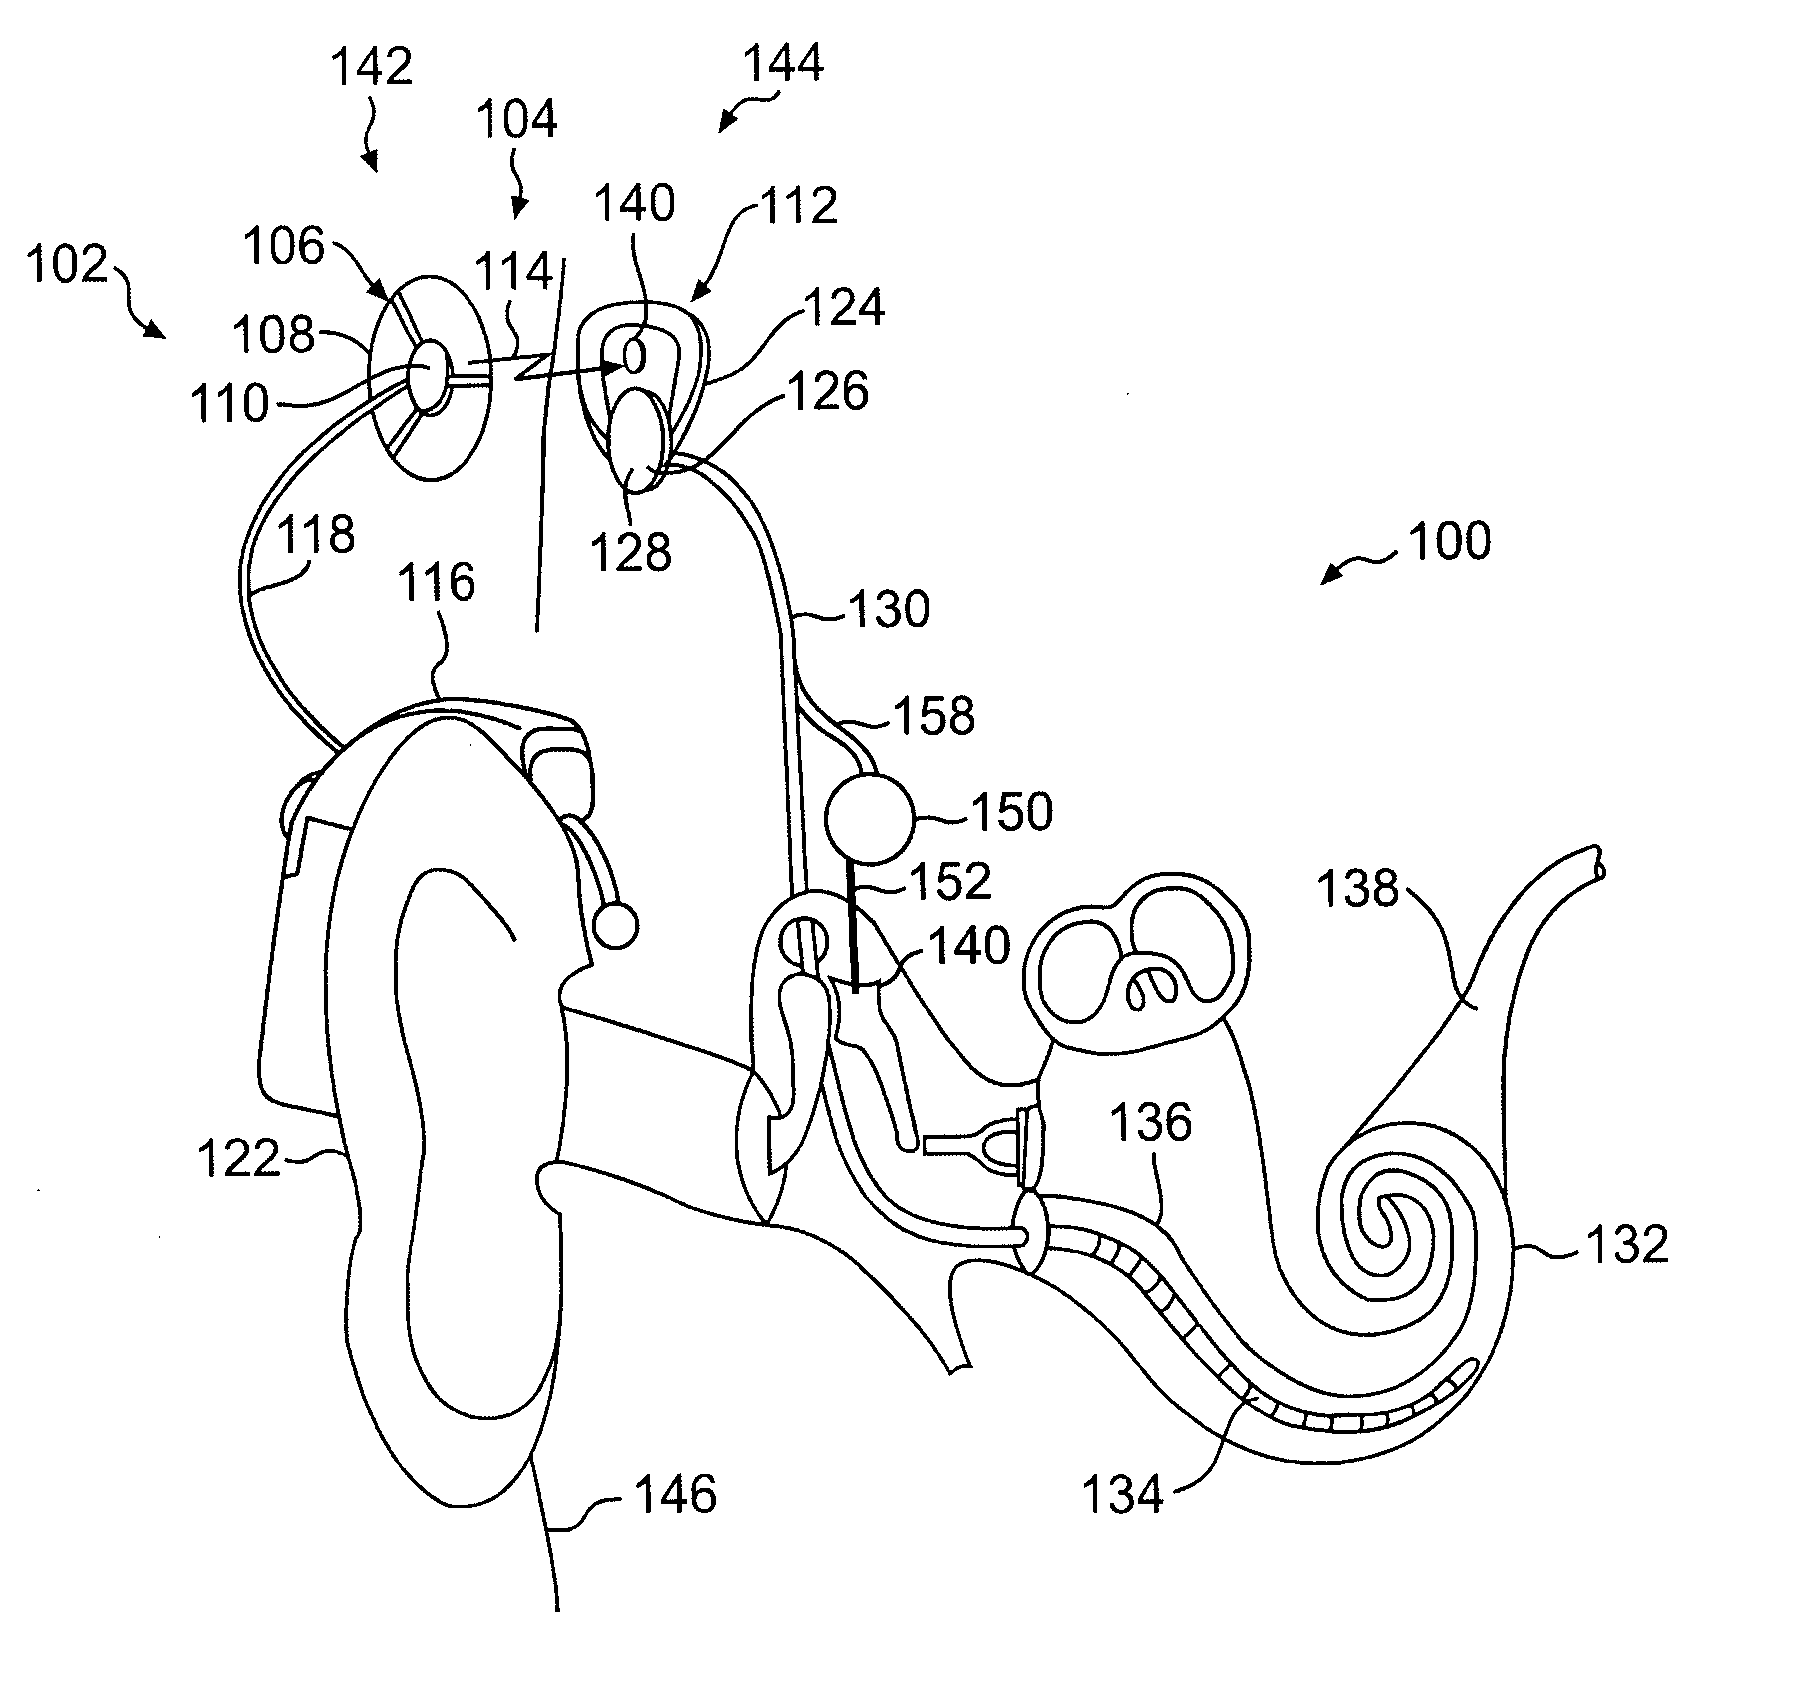 Using a genetic algorithm to fit a cochlear implant system to a patient